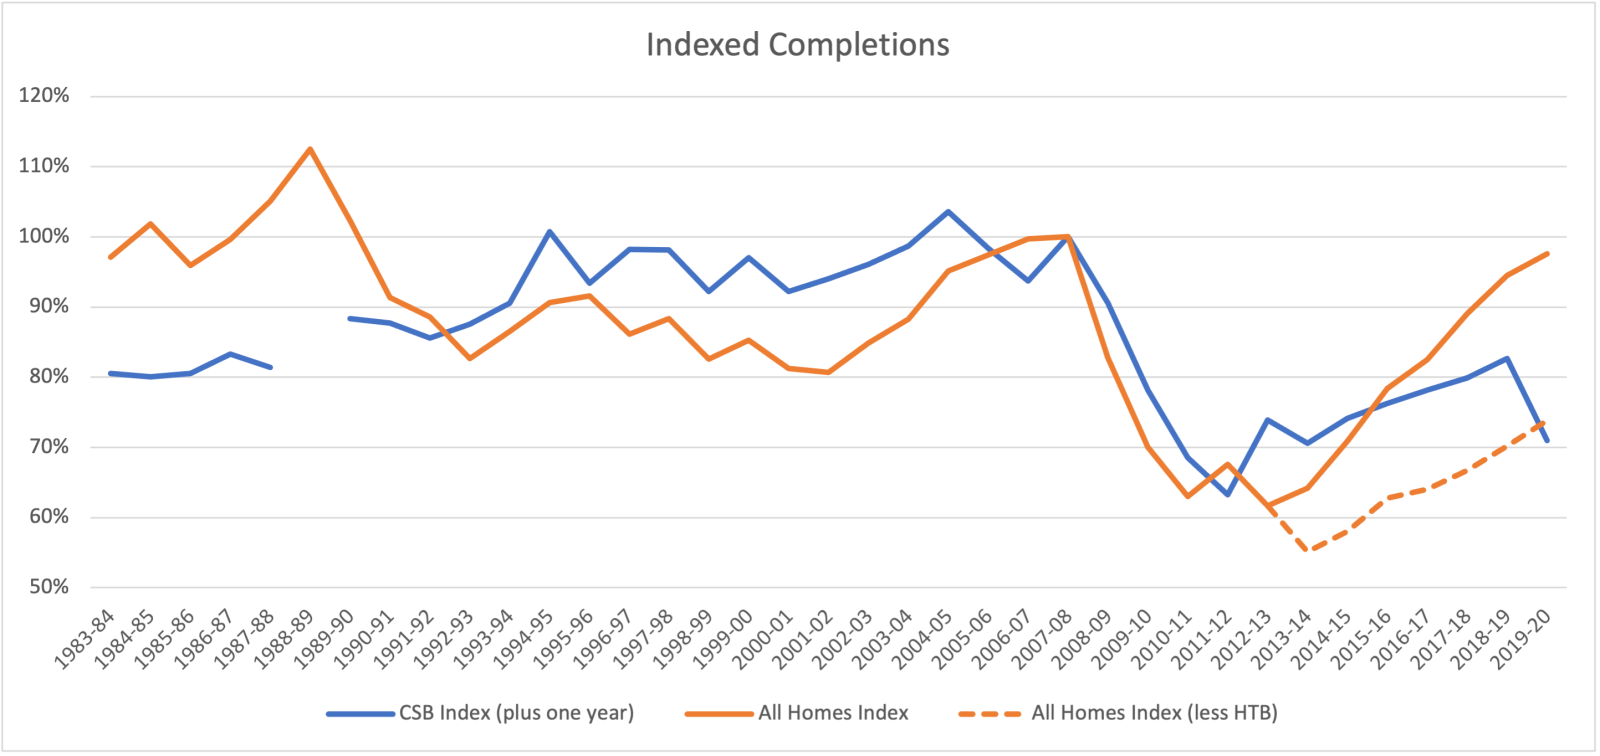 Indexed completions